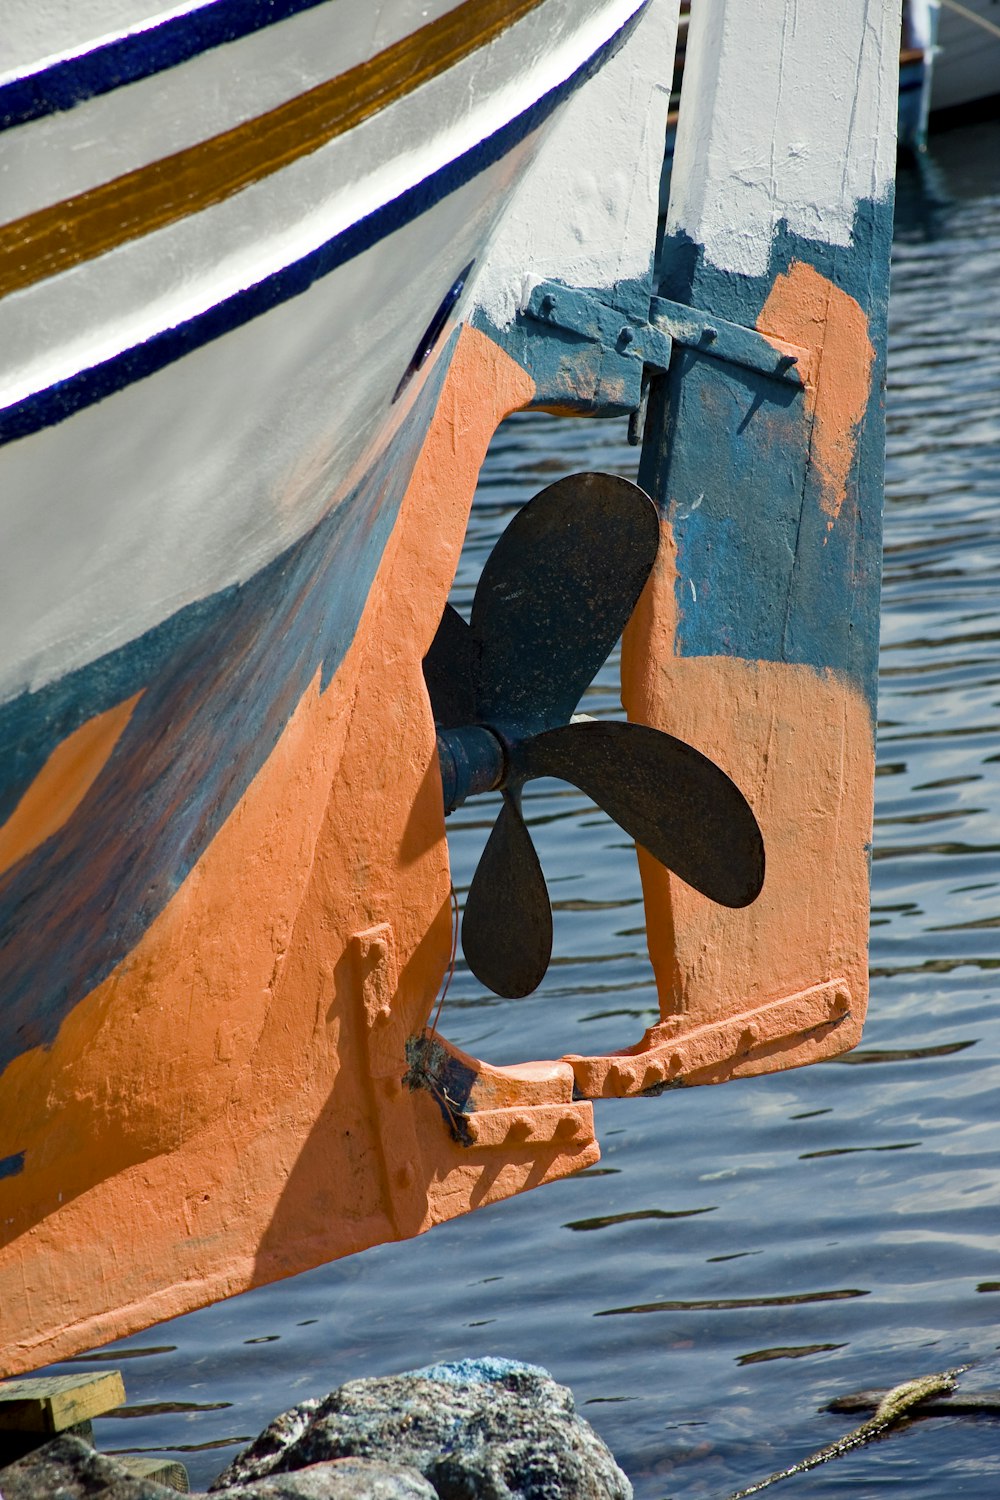 black and white surfboard on blue and white boat during daytime